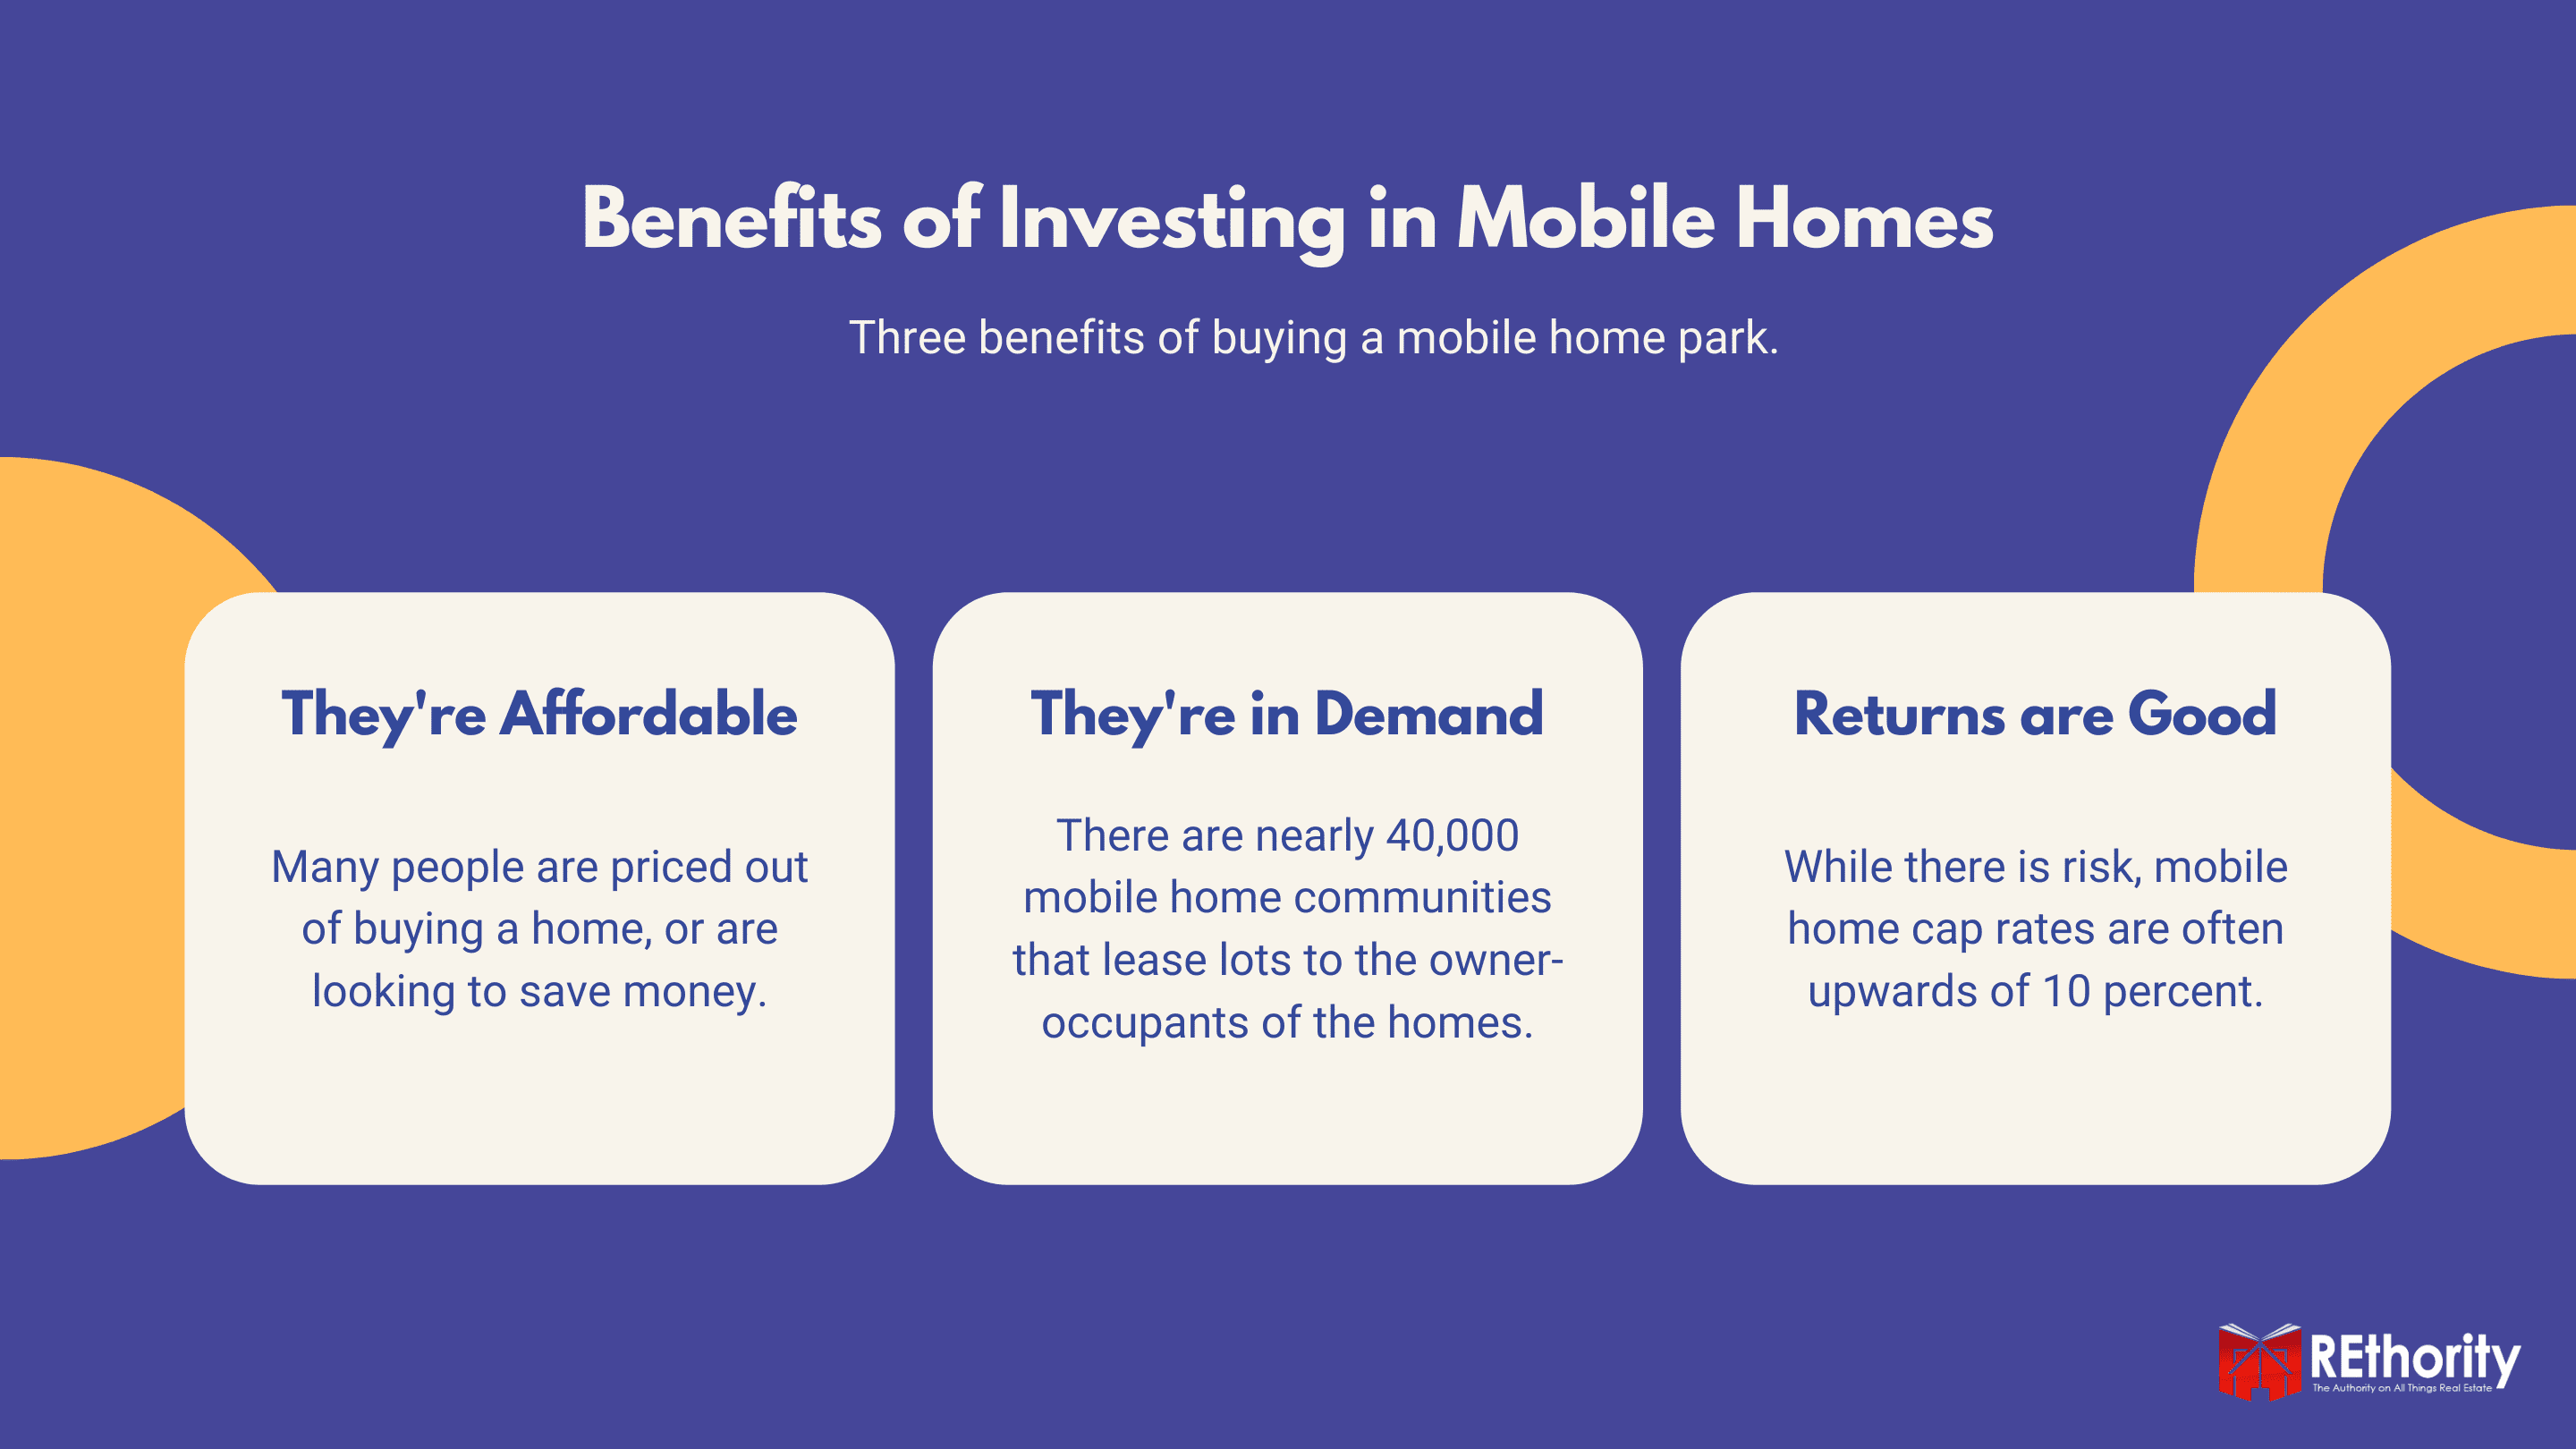 Benefits of Investing in Mobile Homes graphic with three different benefits